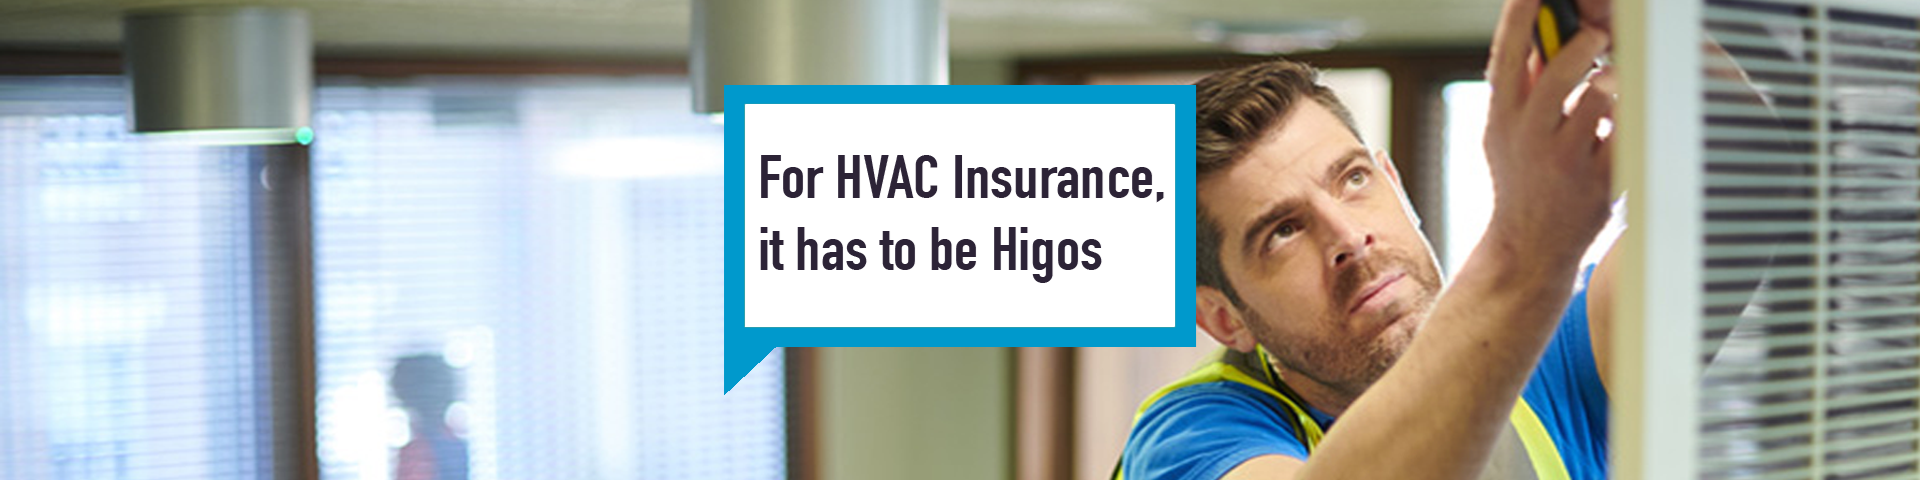 Higos business insurance heating ventilation air conditioning